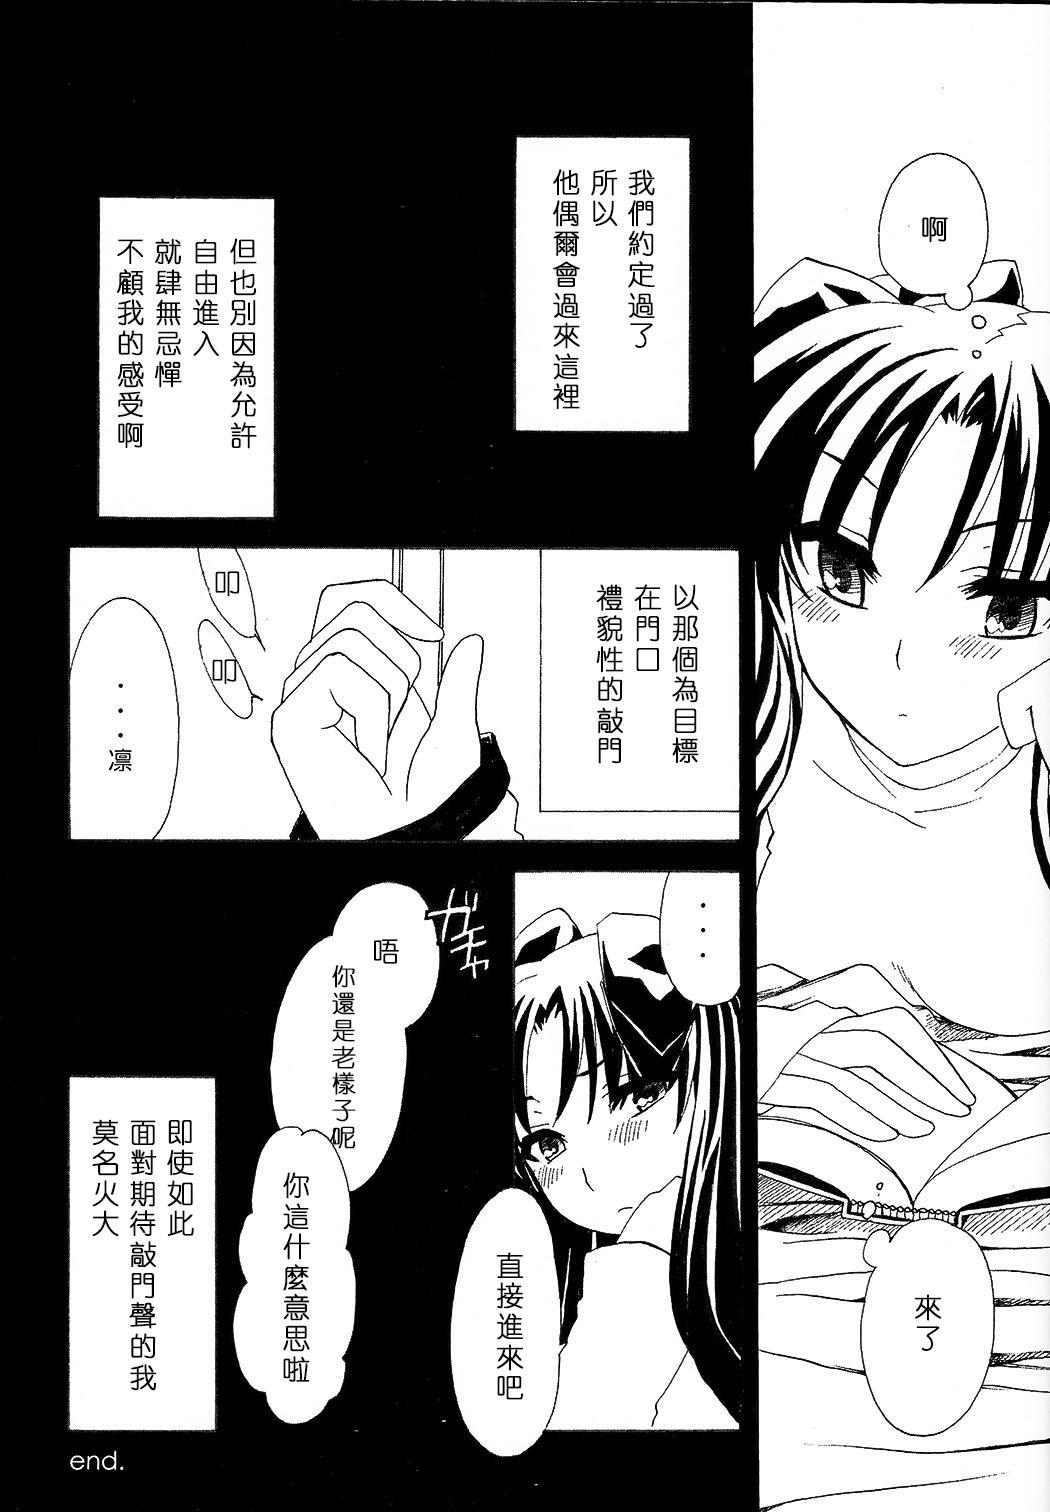 Hotwife :ragtime - Fate stay night Erotic - Page 5